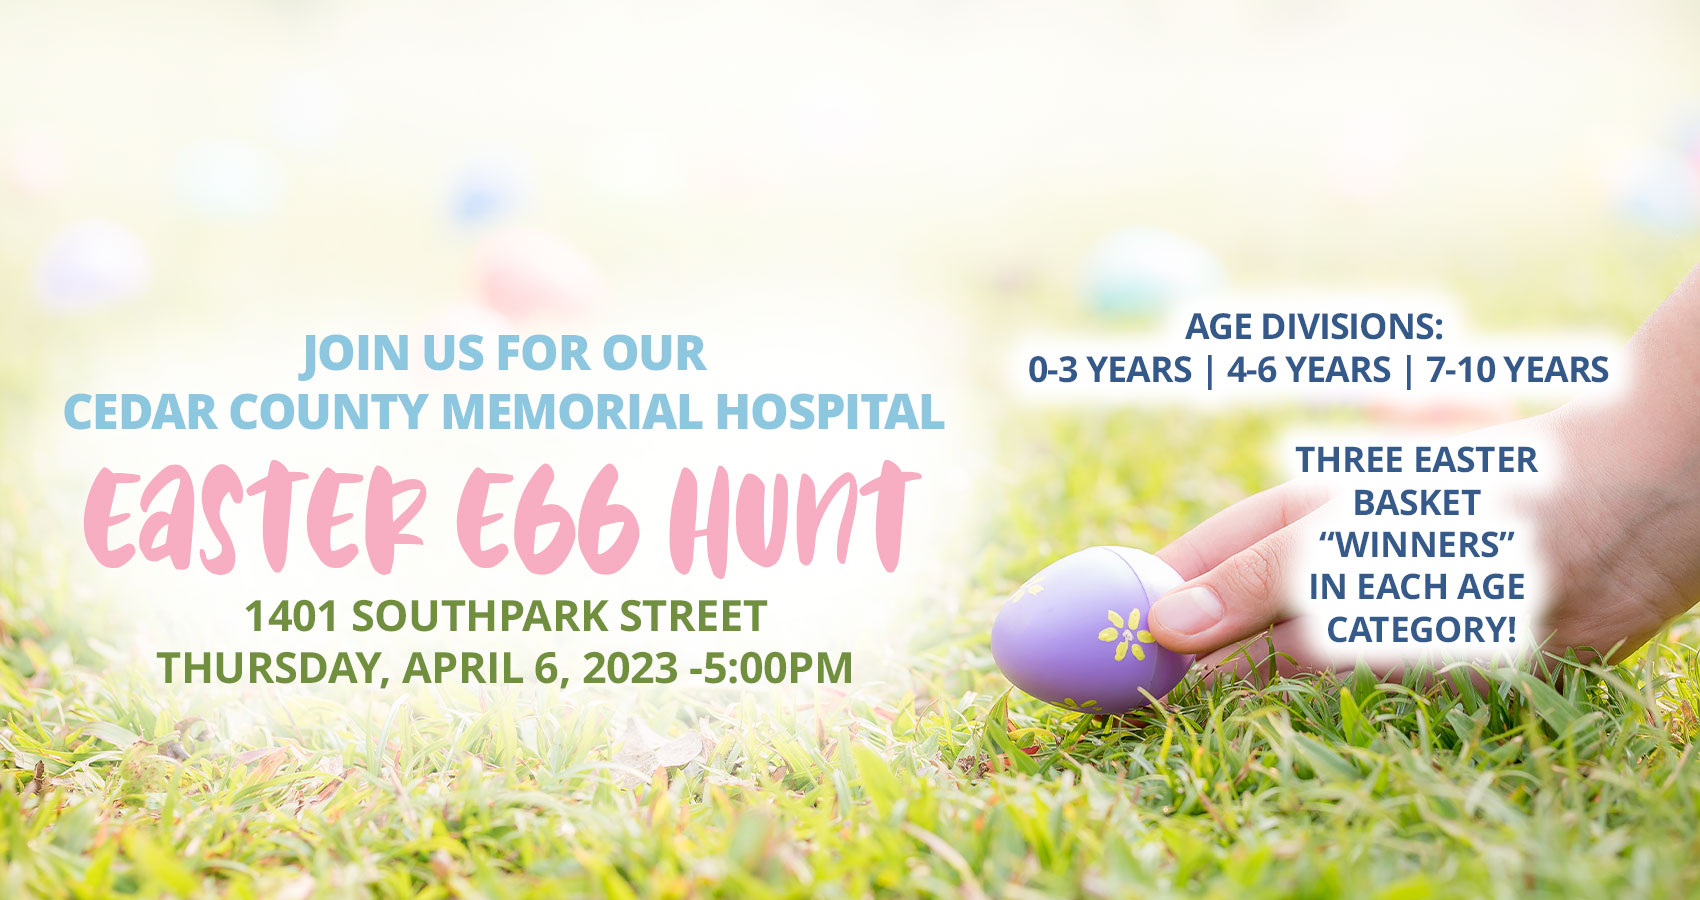 Join Us for our Cedar County Memorial Hospital Easter Egg Hunt
1401 Southpark Street
Thursday, April 6, 2023 - 5:00 PM

Age Divisions 0-3 Years | 4-6 Years | 7-10 Years

Three Easter Basket "Winners" in each age category!